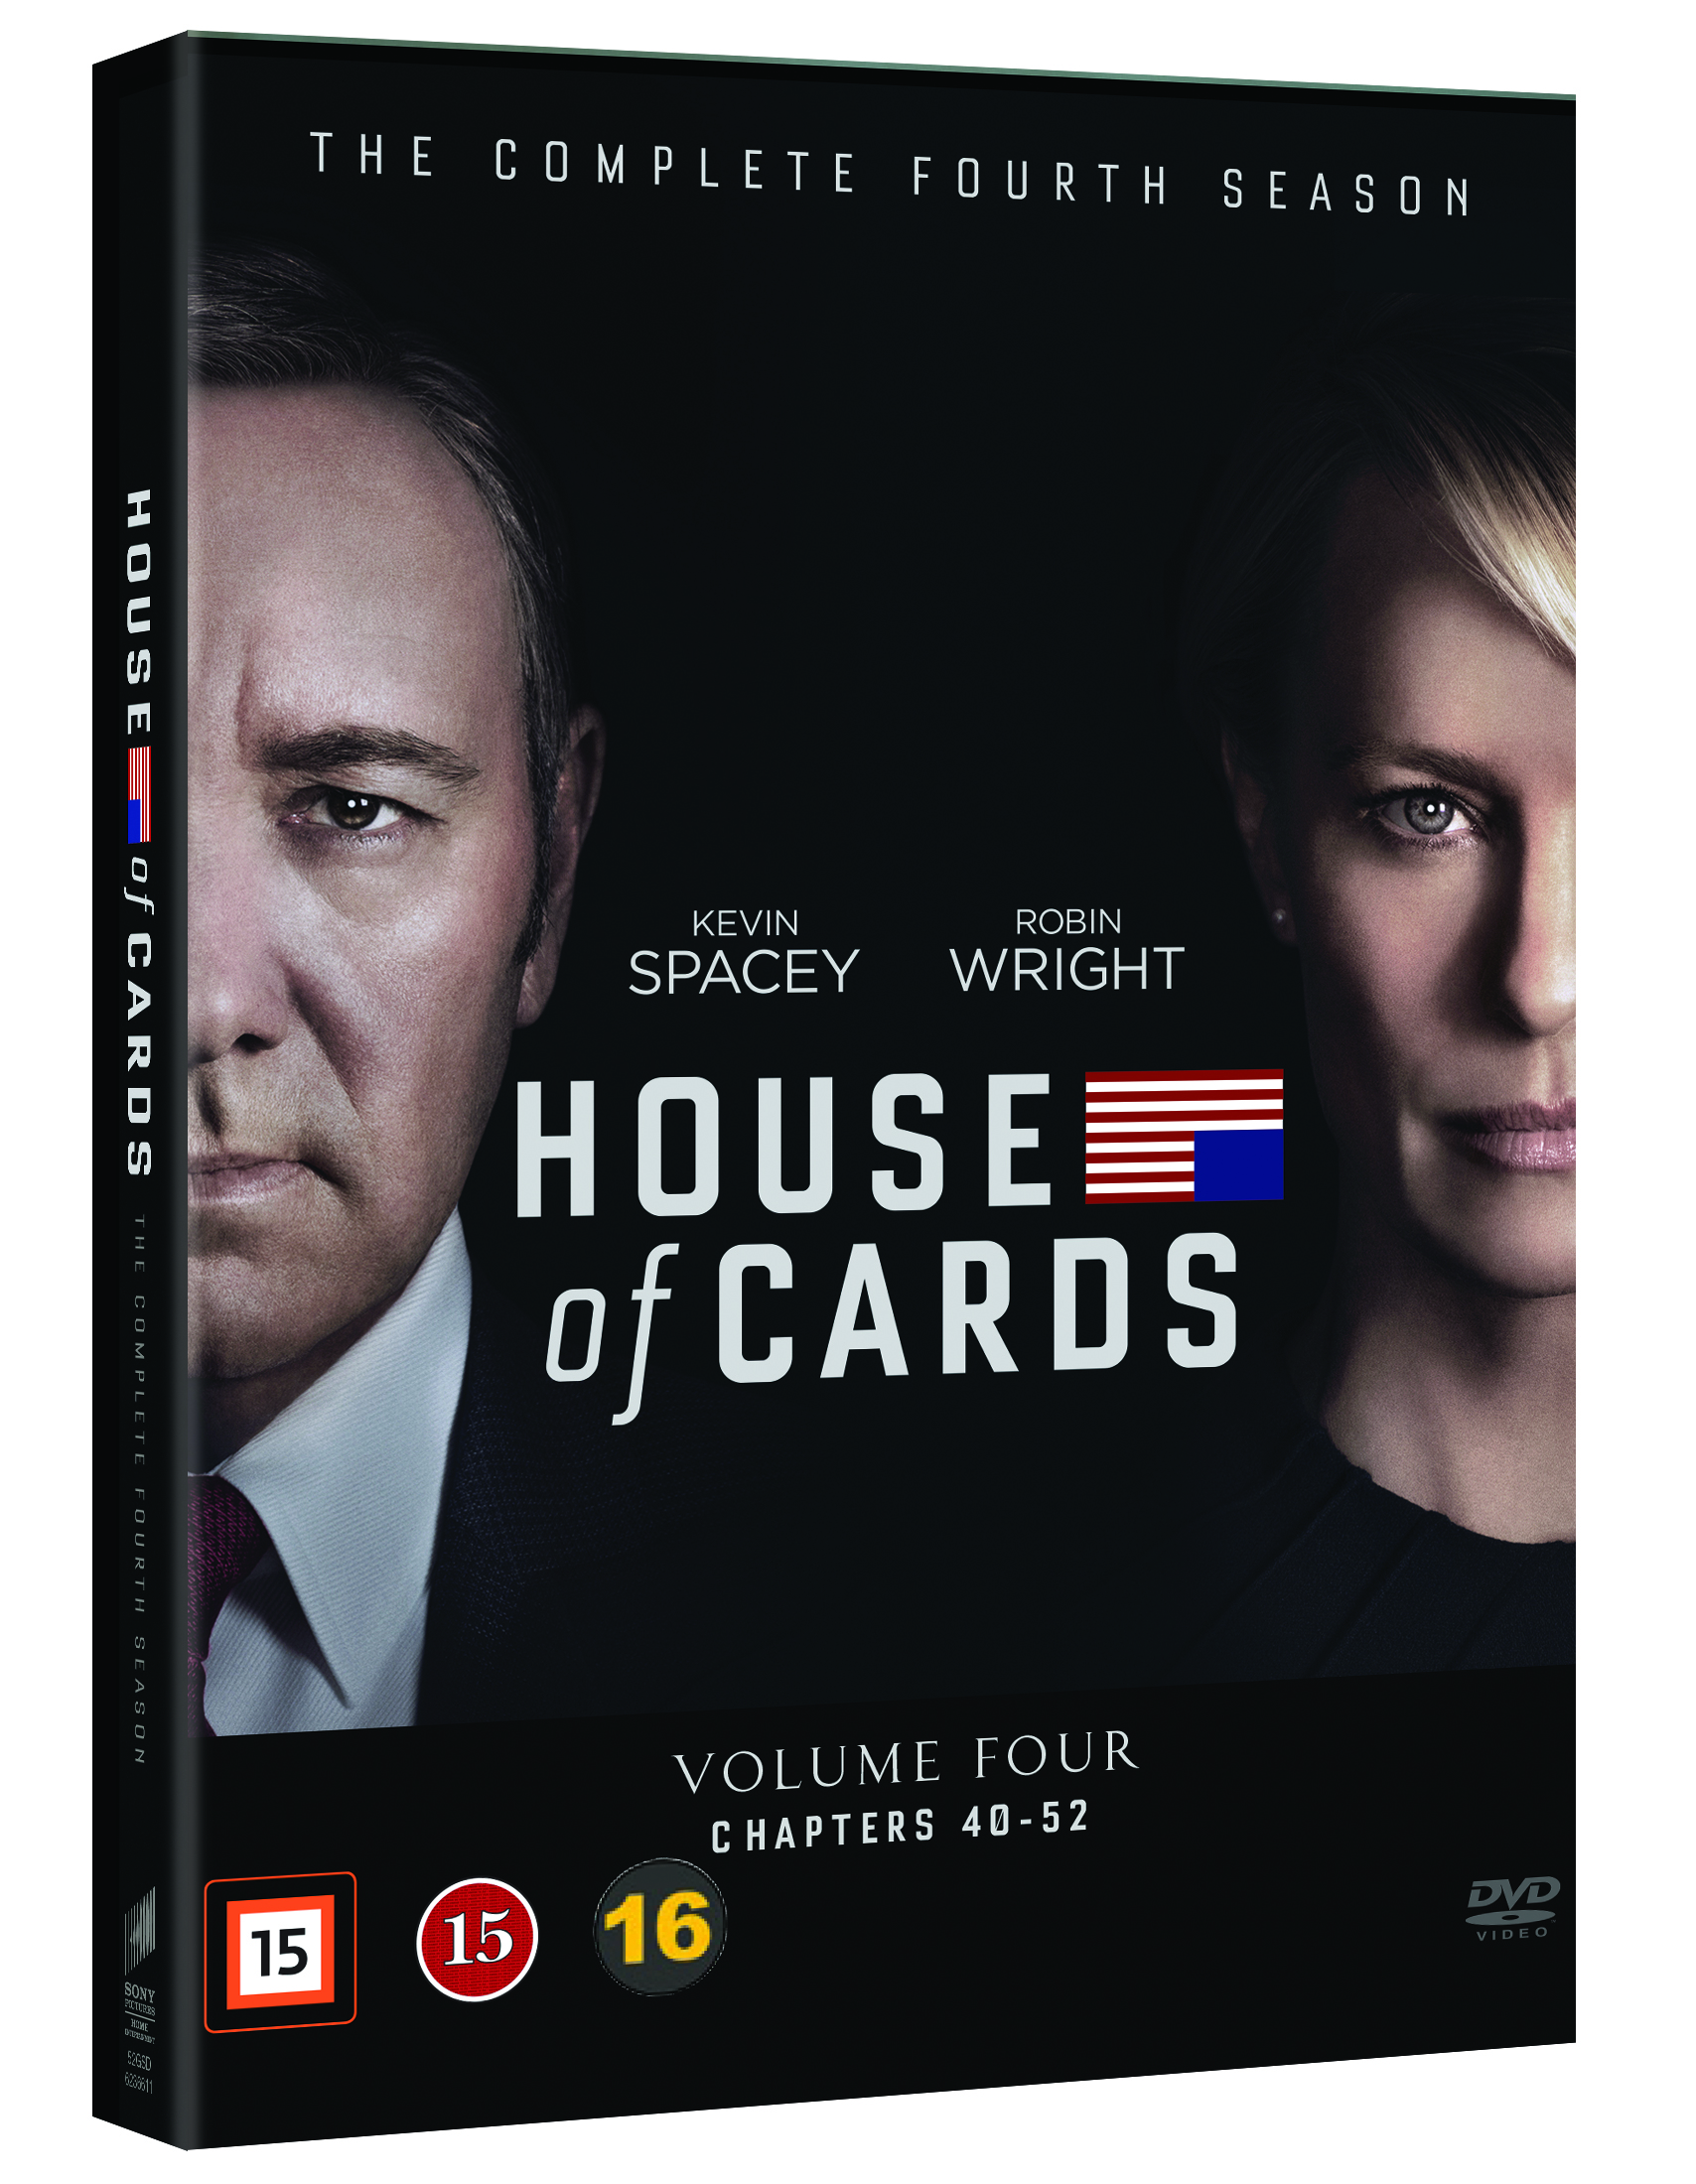 download torrent for house of cards season 4